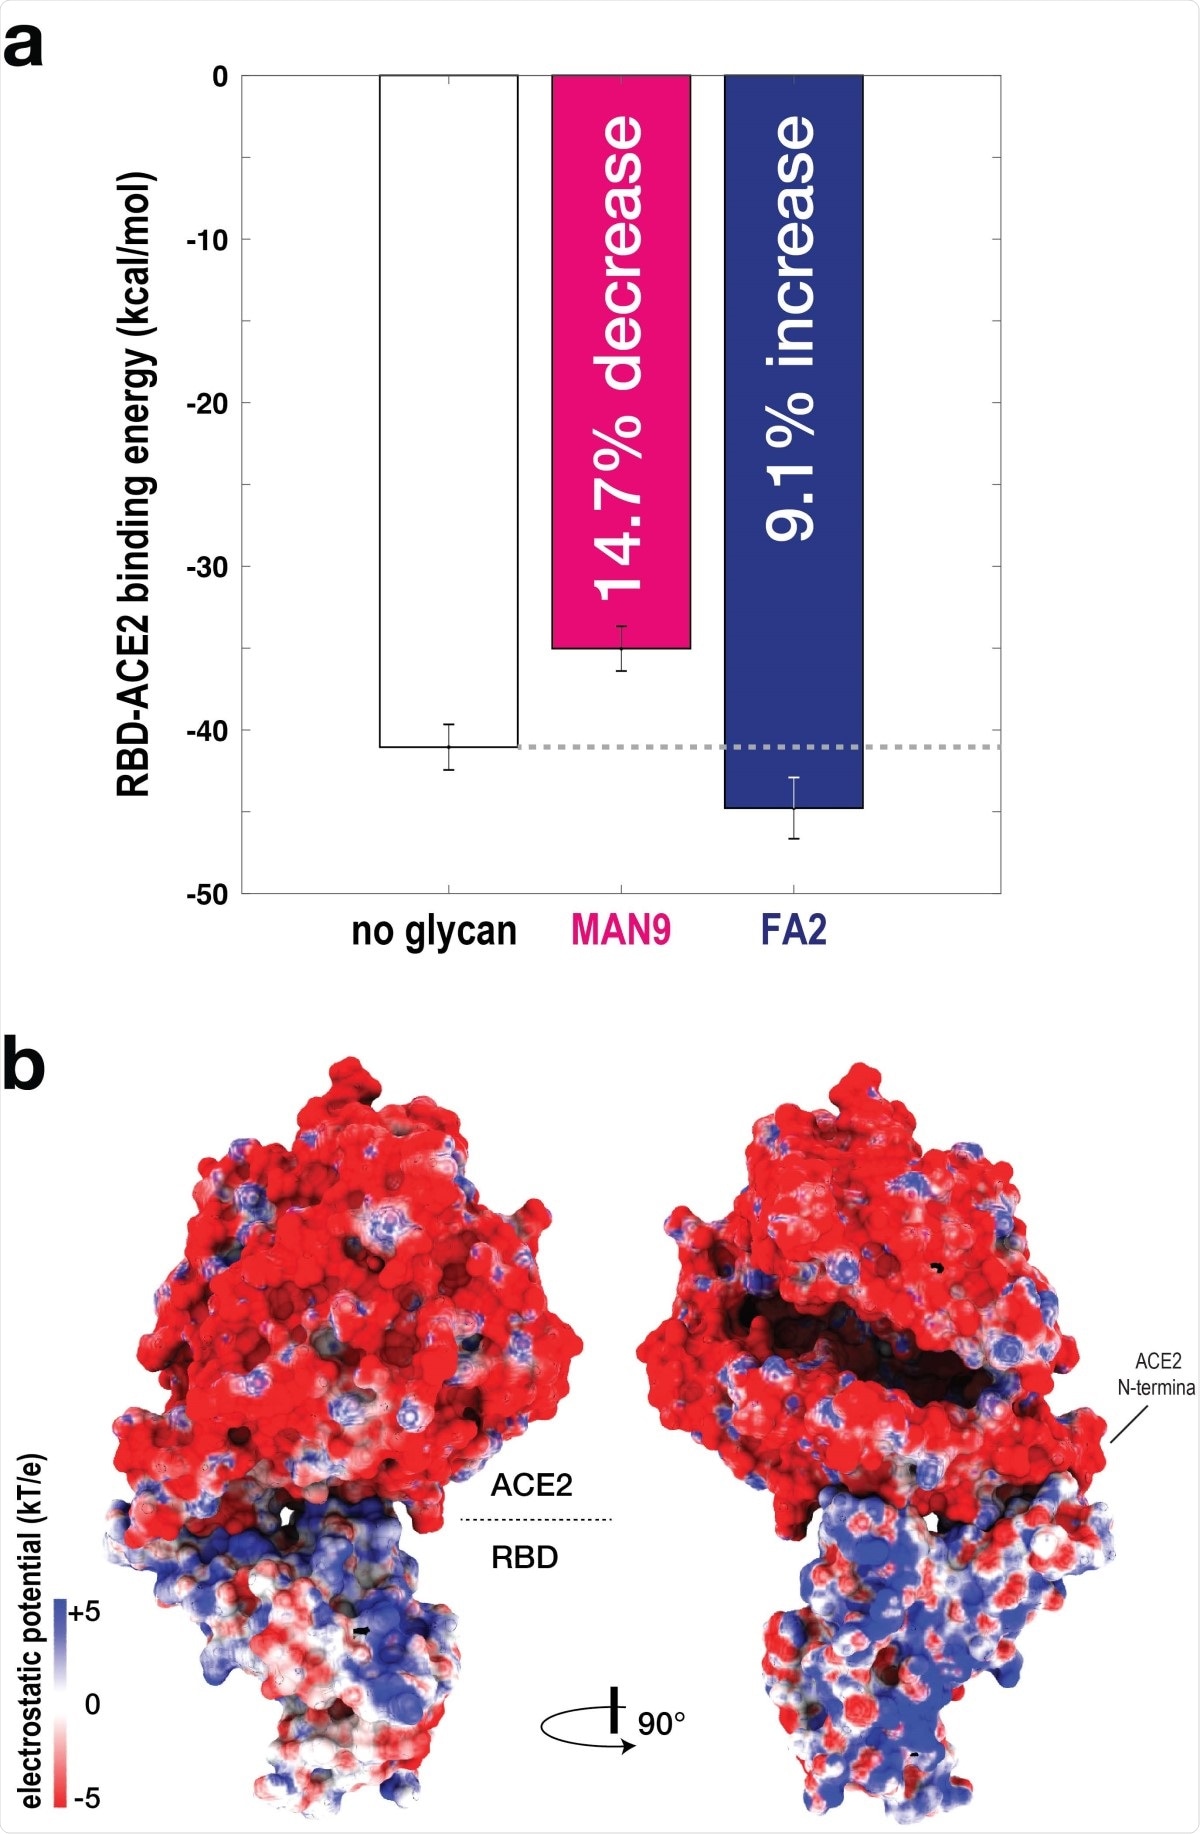 RBD-ACE2 binding affinity is glycan dependent. (a) To evaluate the binding energy between RBD-ACE2, the MM-PBSA approach was applied. Binding energy was calculated for simulations without glycans (white bar), and with MAN9 glycans (magenta bar) or FA2 glycans (blue bar) on ACE2. Simulations with MAN9 glycans on ACE2 are associated with a 14:7% decrease in stability, relative to the non-glycan simulations. In contrast, simulations with FA2 glycans on ACE2 result in a 9:1% increase in stability. (b) Electrostatic surface potential calculated for ACE2 and RBD. Two complementary views show that the ACE2 surface is overall negatively charged, while the surface of RBD is overall positive.